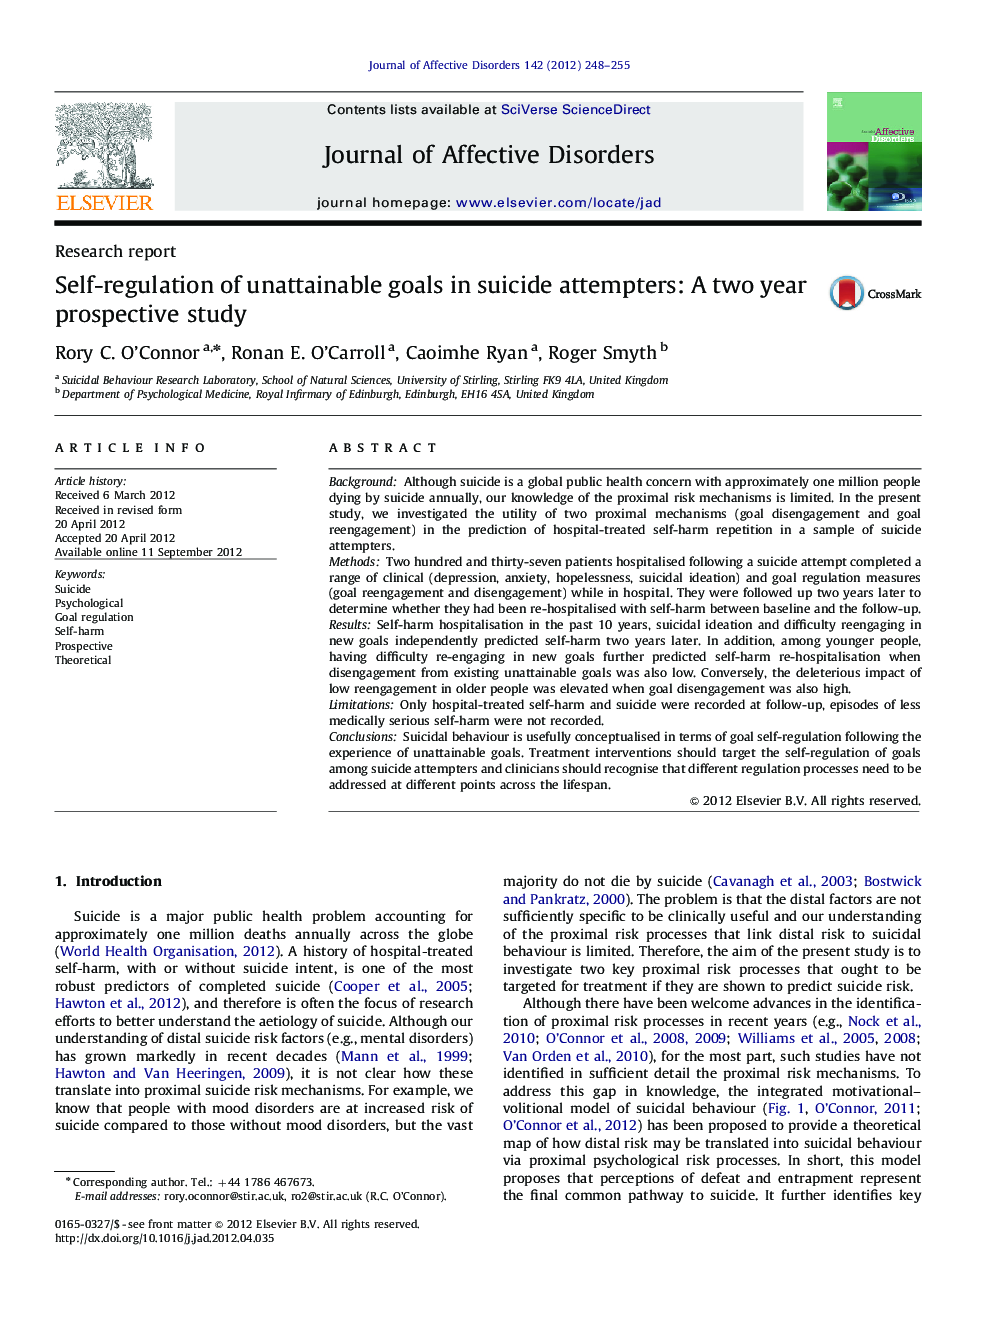 Self-regulation of unattainable goals in suicide attempters: A two year prospective study